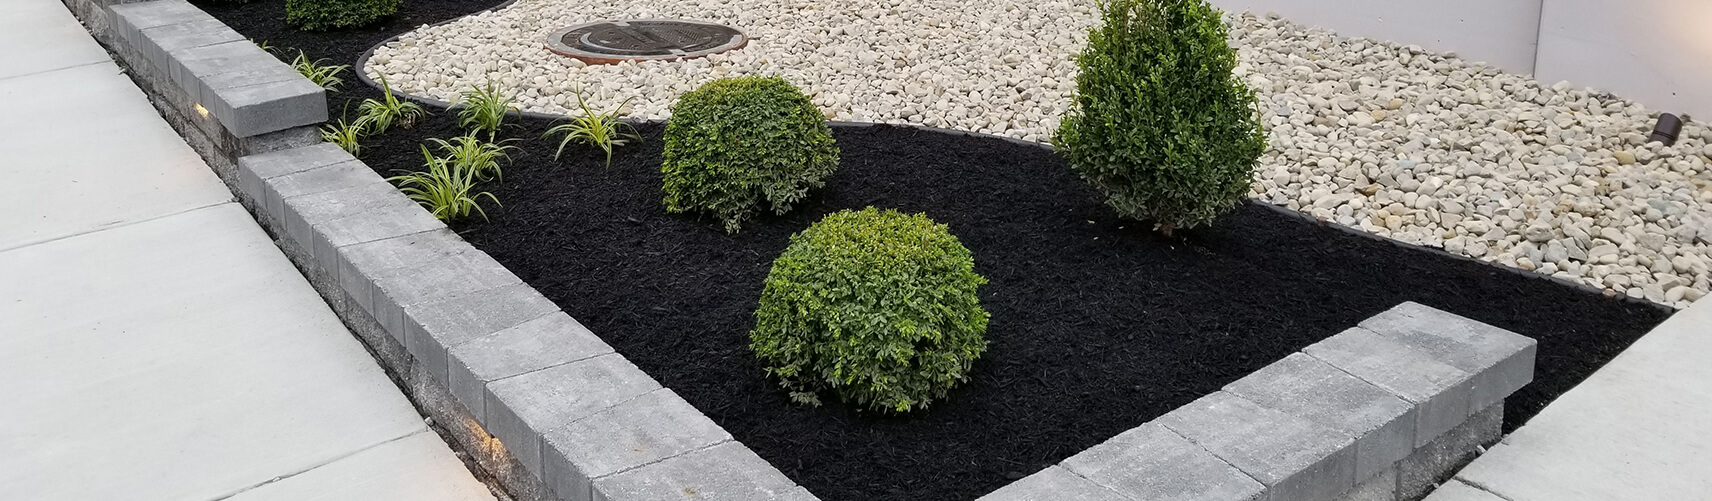 Springfield Landscaping Company, Landscaper and Landscaping Services